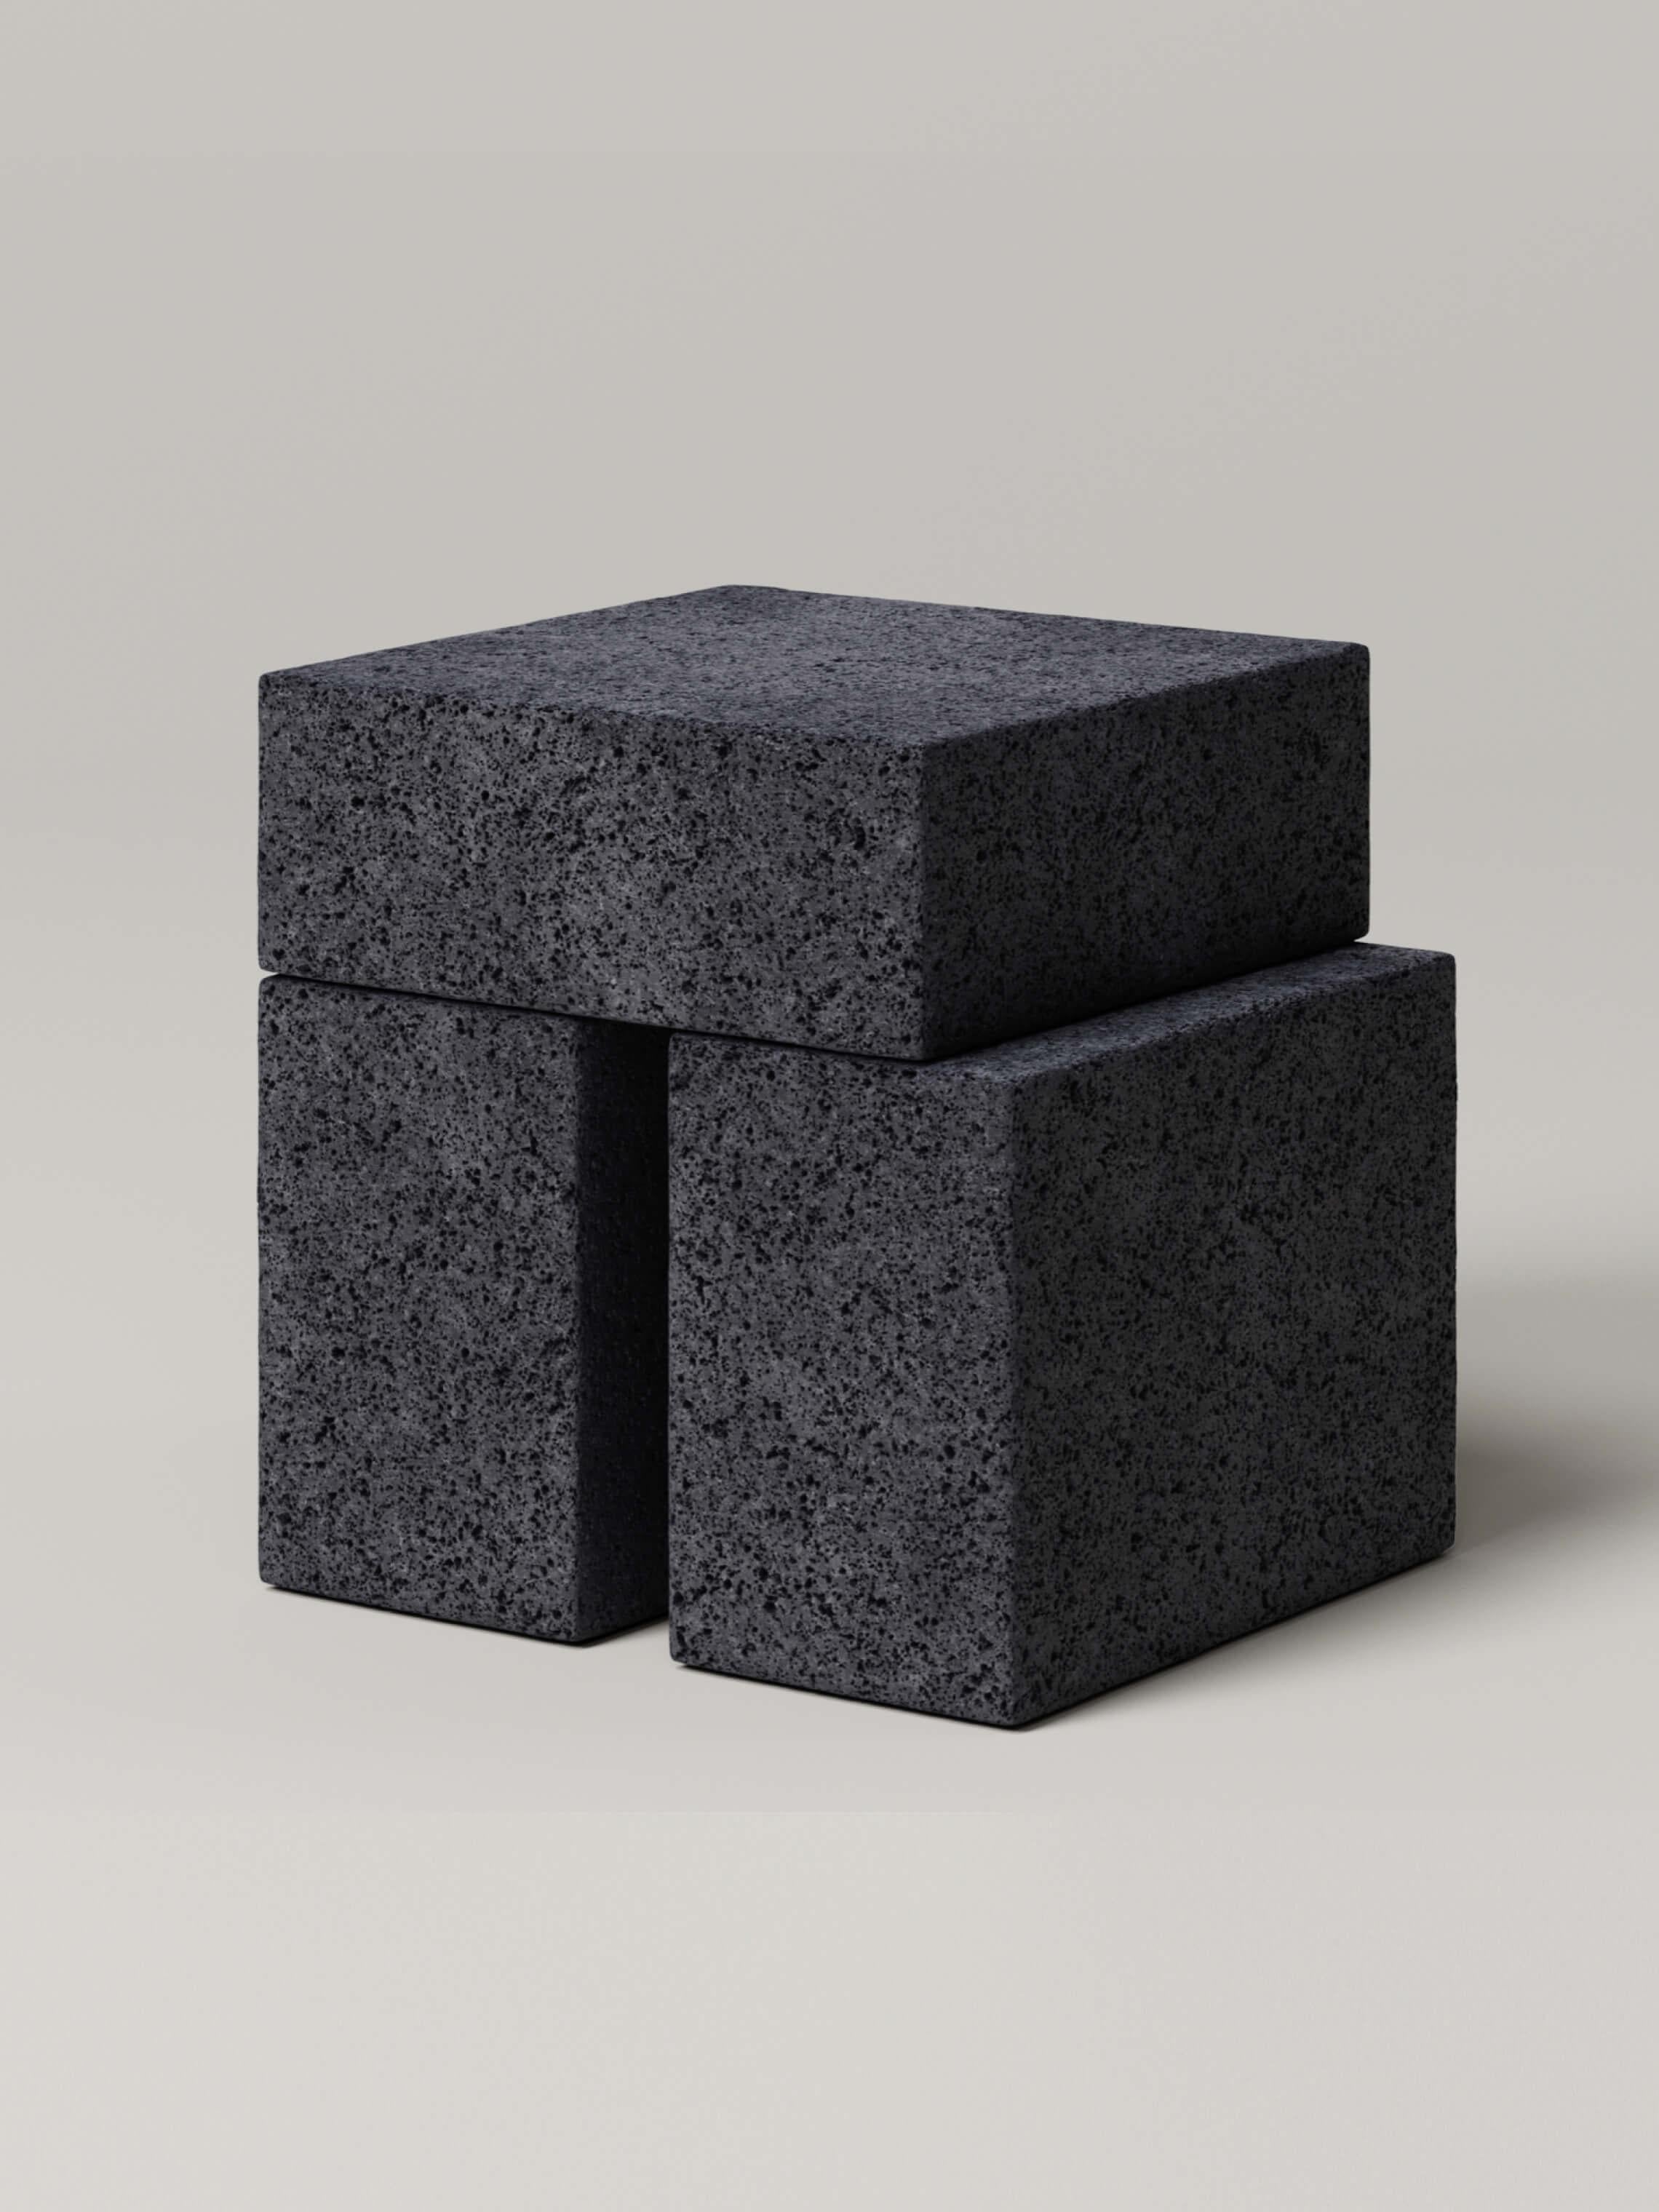 M_009 Lava Rock Side Table by Monolith Studio
Signed and Numbered.
Dimensions: D 40 x W 45 x H 45 cm.
Materials: Lava rock.

Available in travertine, lava rock and white onyx (on request). Please contact us. 

Monolith, founded in 2022 by Marc